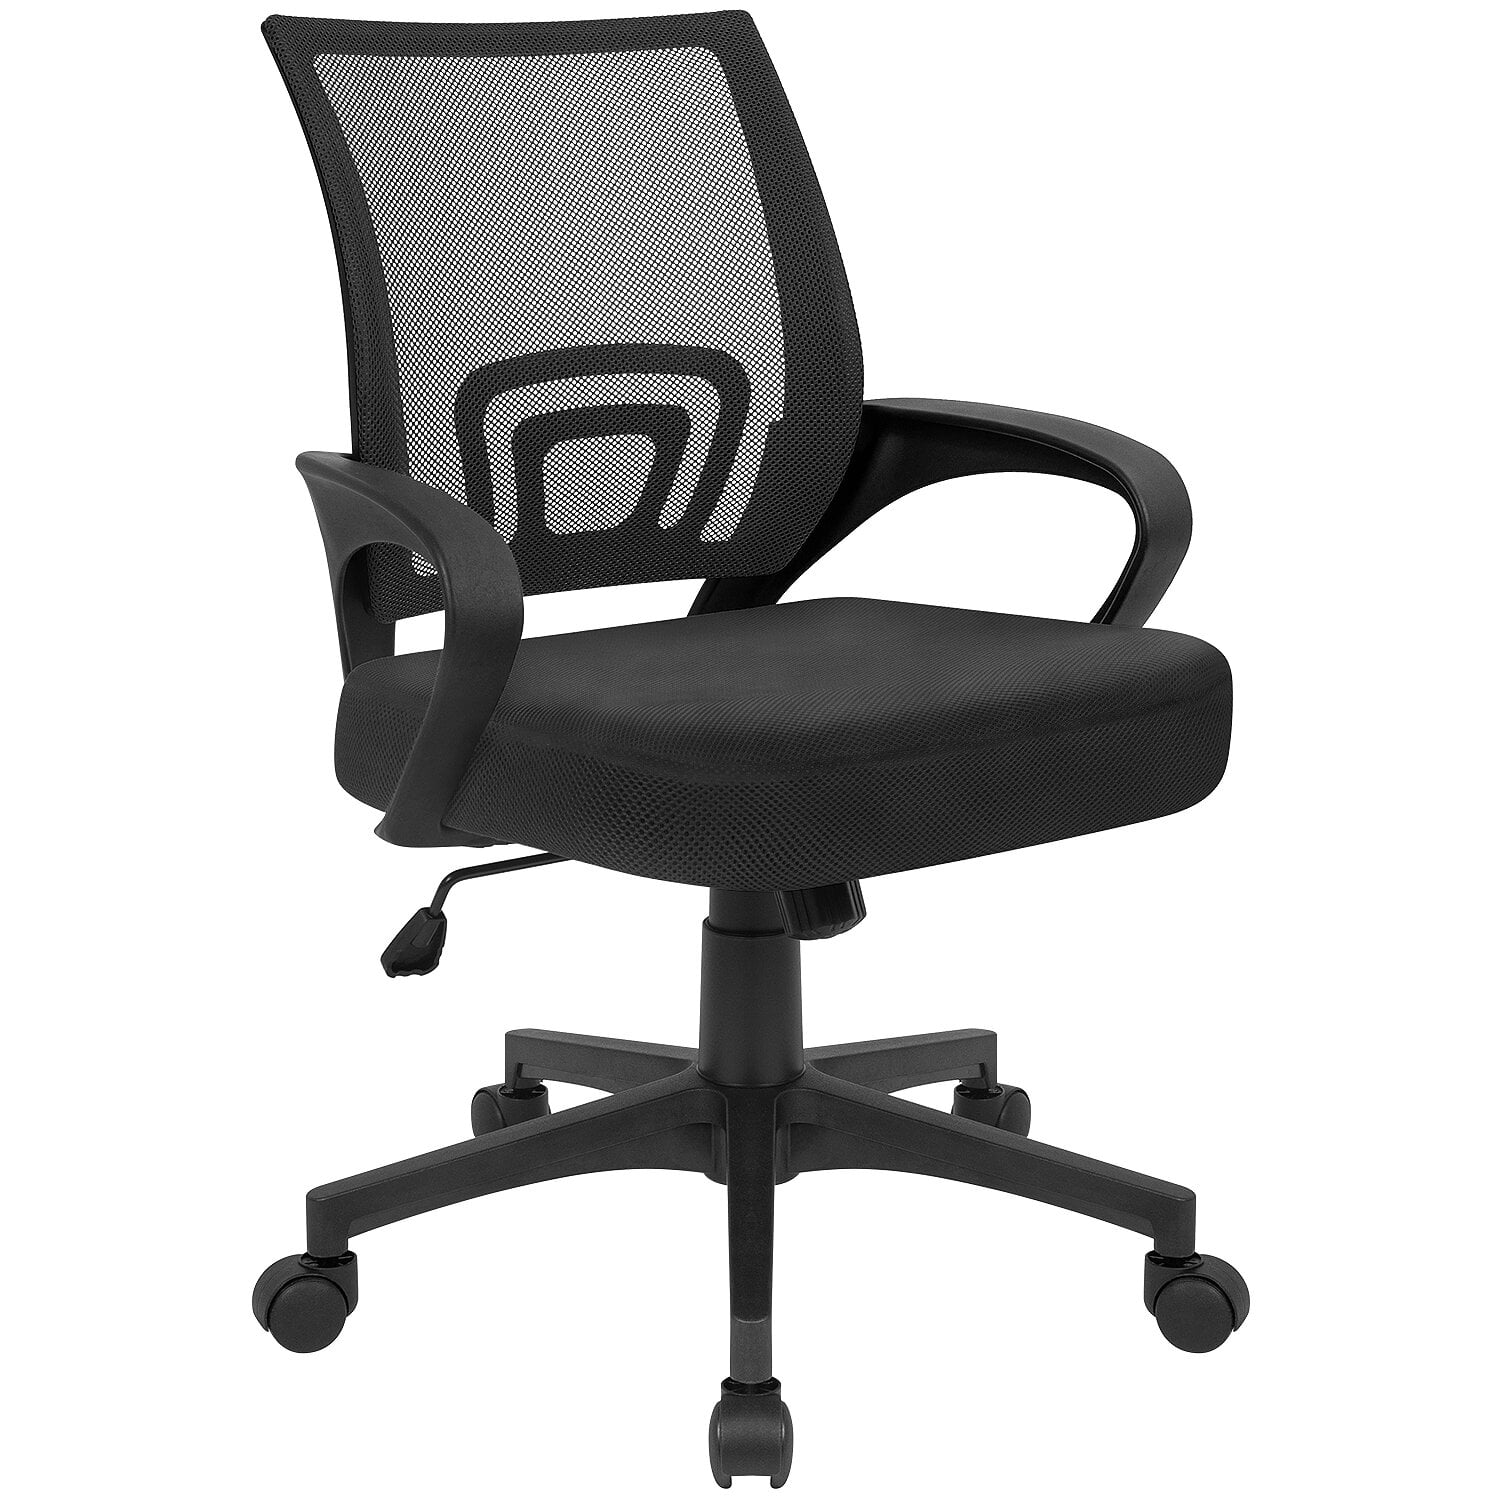 XELO OFFICE DESK CHAIR ADJUSTABLE Details about   NEW MID-BACK MESH TASK CHAIR 4 COLORS 